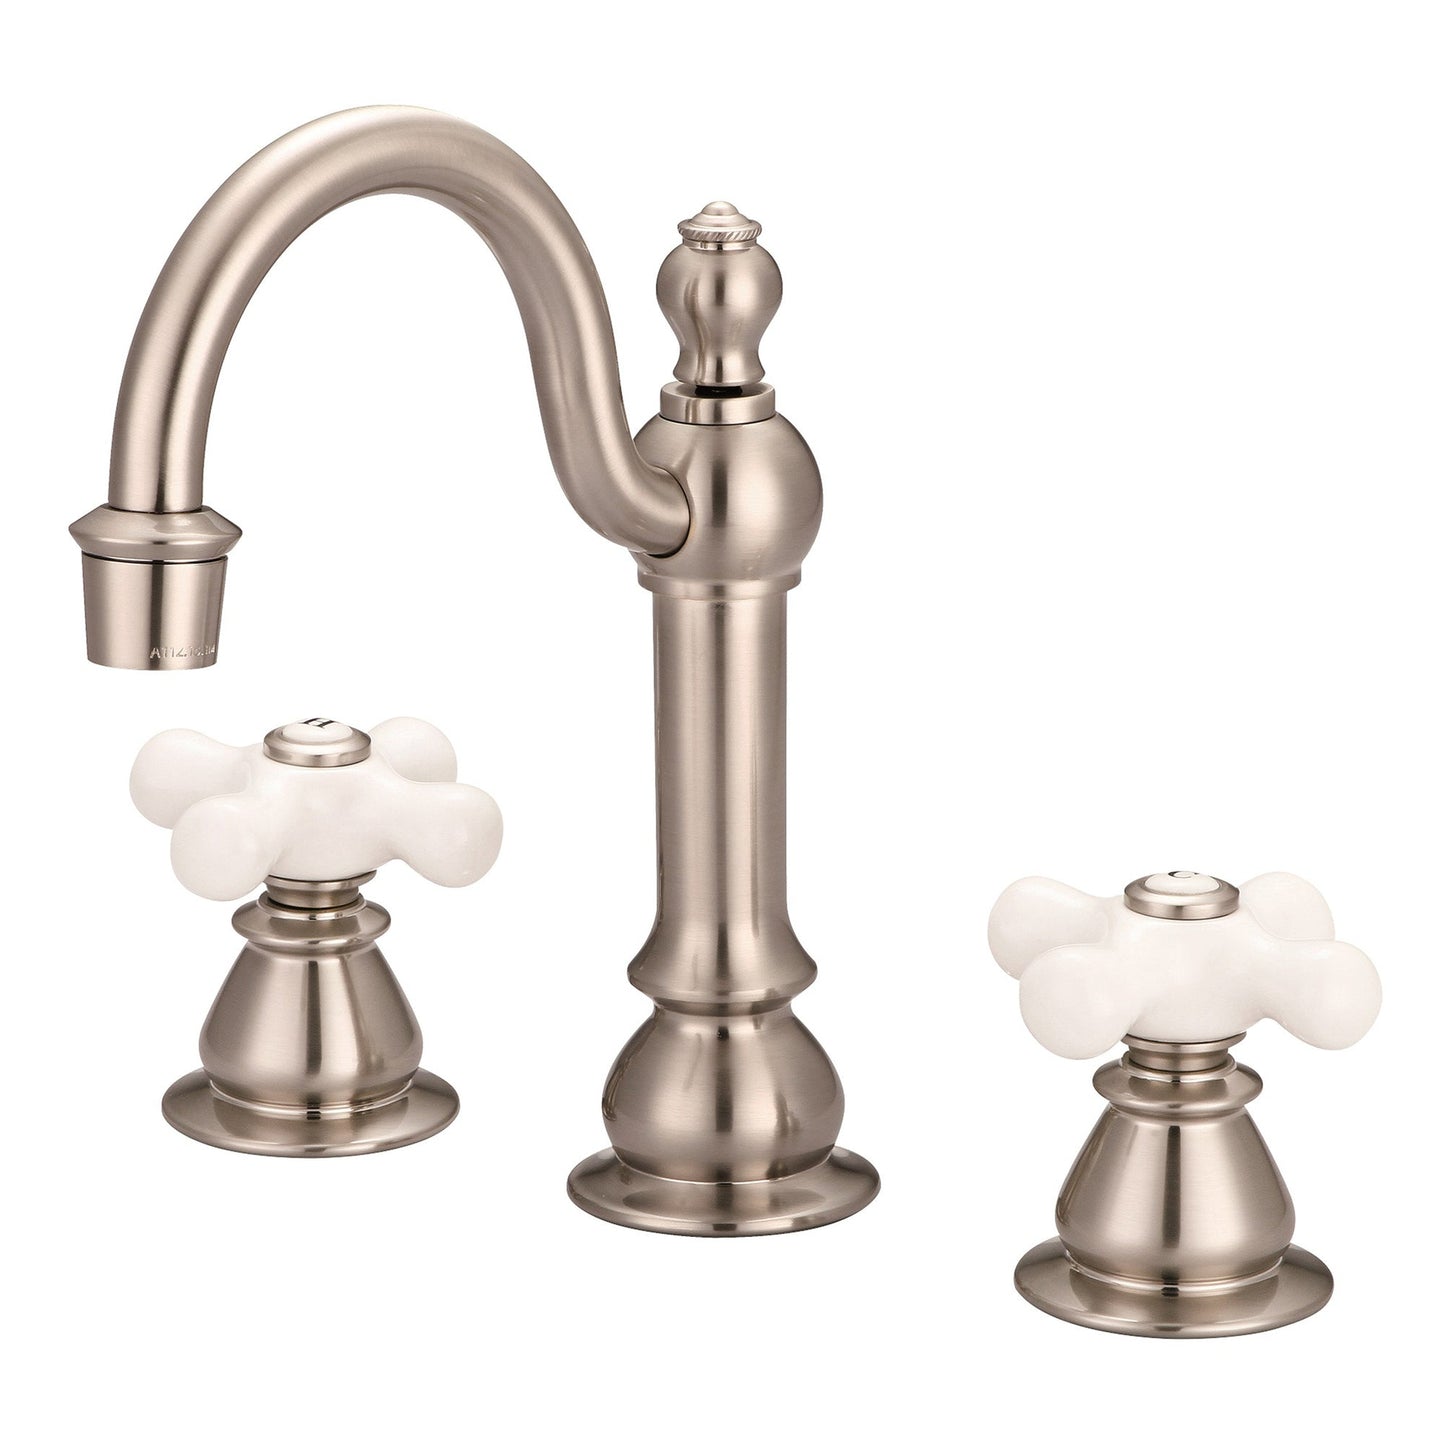 Water Creation American 20th Century Classic Widespread Lavatory F2-0012 8" Grey Solid Brass Faucet With Pop-Up Drain And Porcelain Cross Handles, Hot And Cold Labels Included